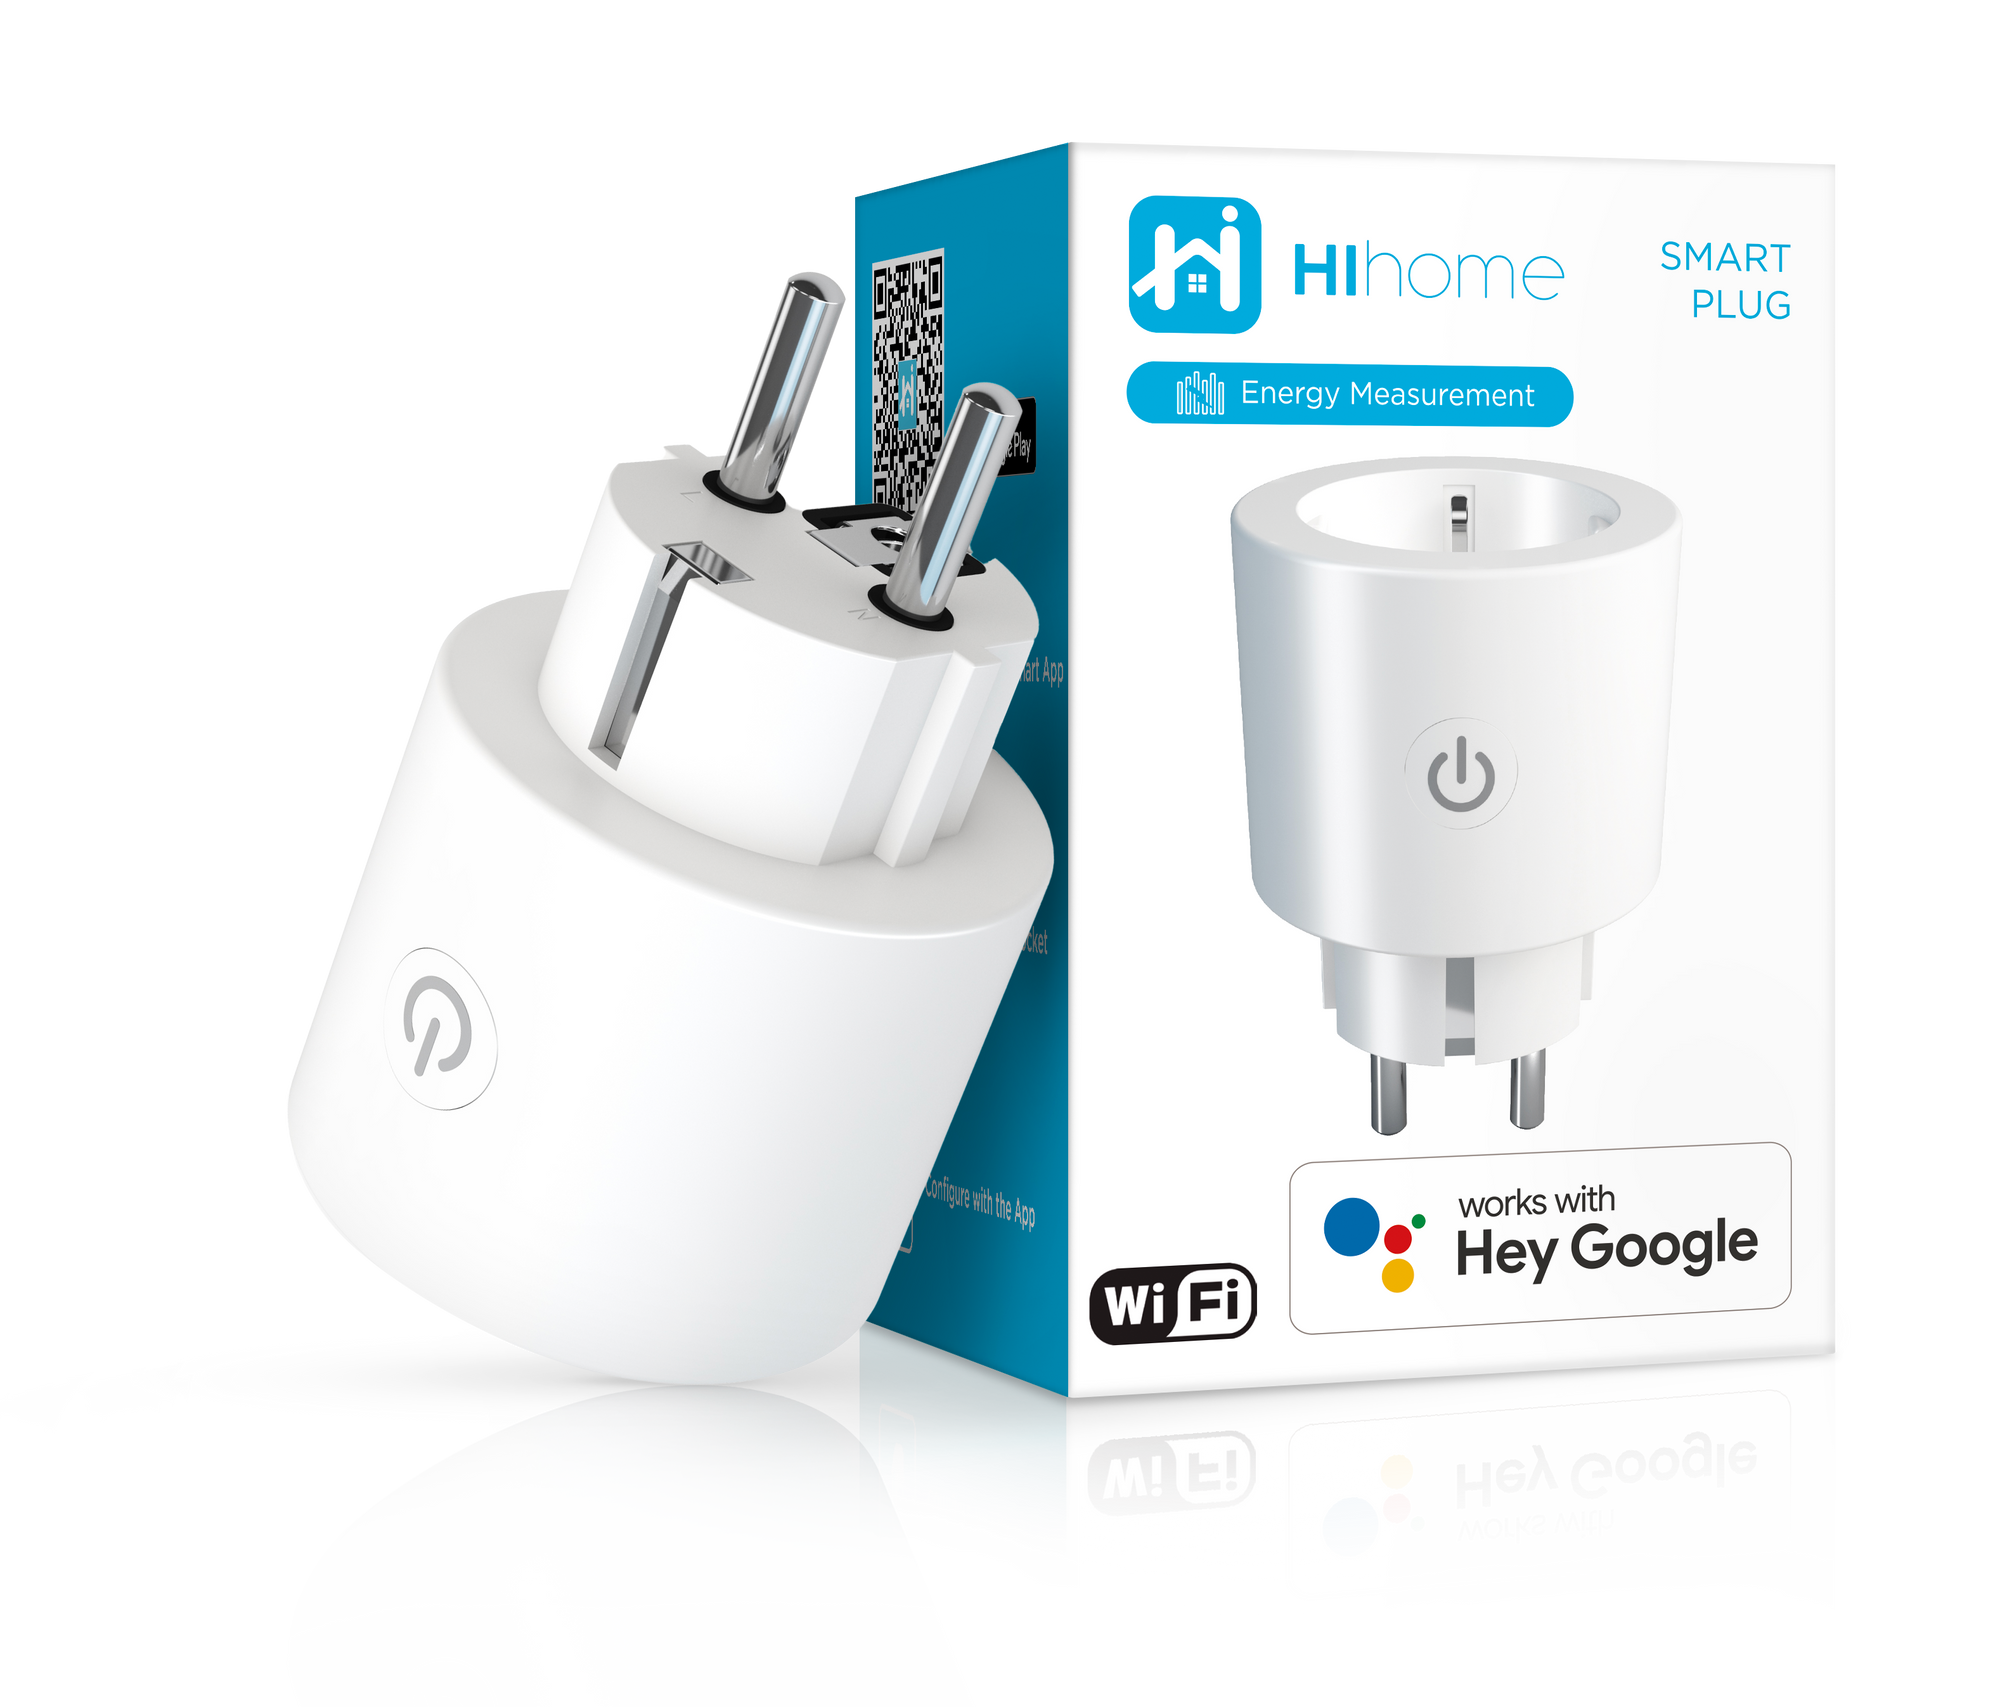 Hihome Gen2 products with Bluetooth Easy Connect